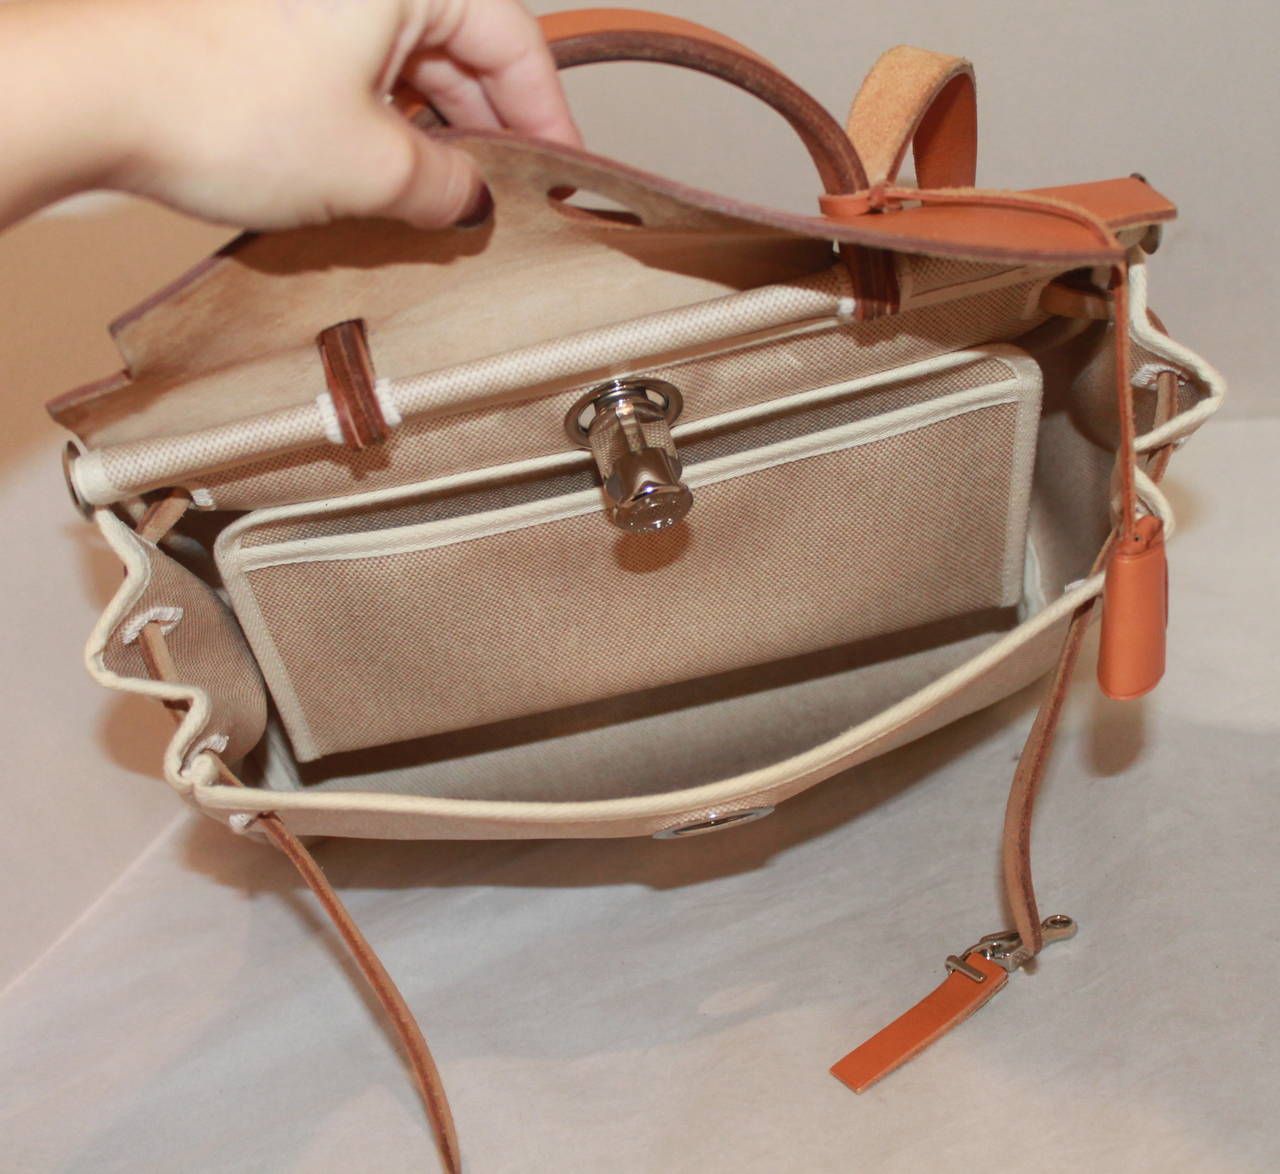 Hermes Gold Leather Tan and Black Canvas \u0026quot;Her\u0026quot; Bag 31 cm at 1stdibs  